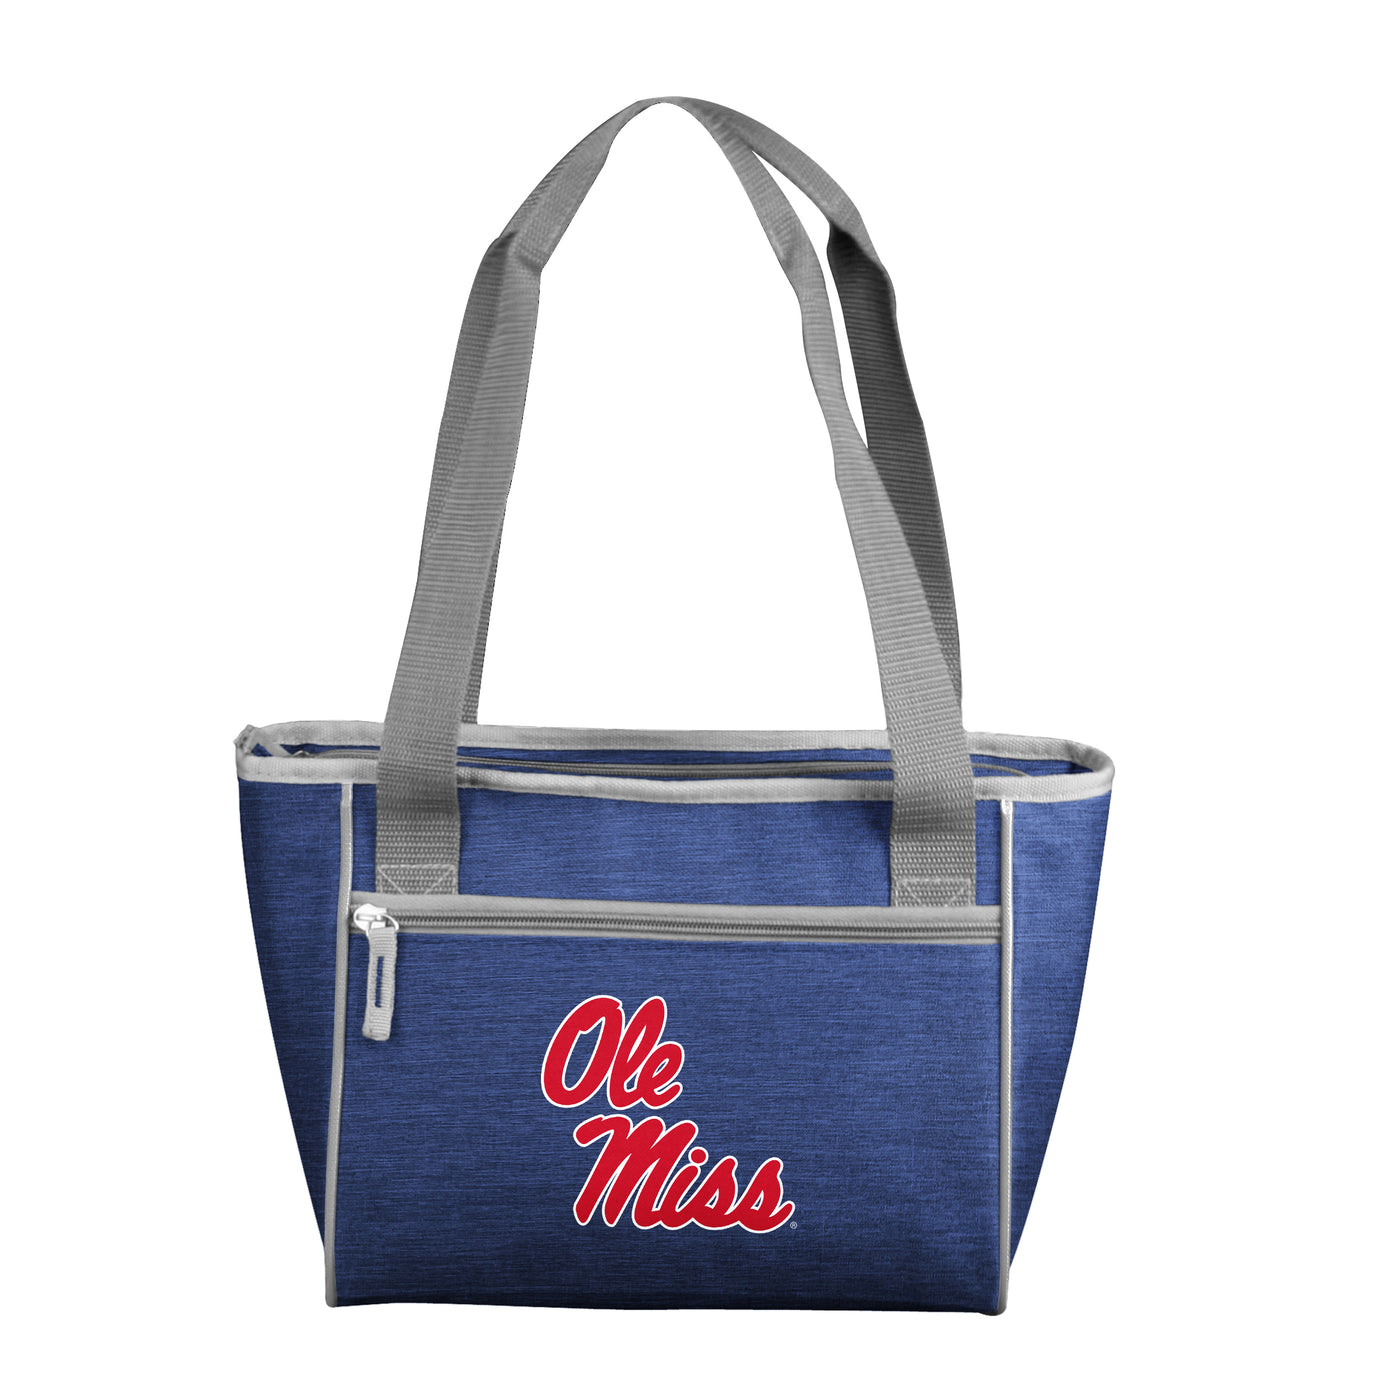 Ole Miss Crosshatch 16 Can Cooler Tote